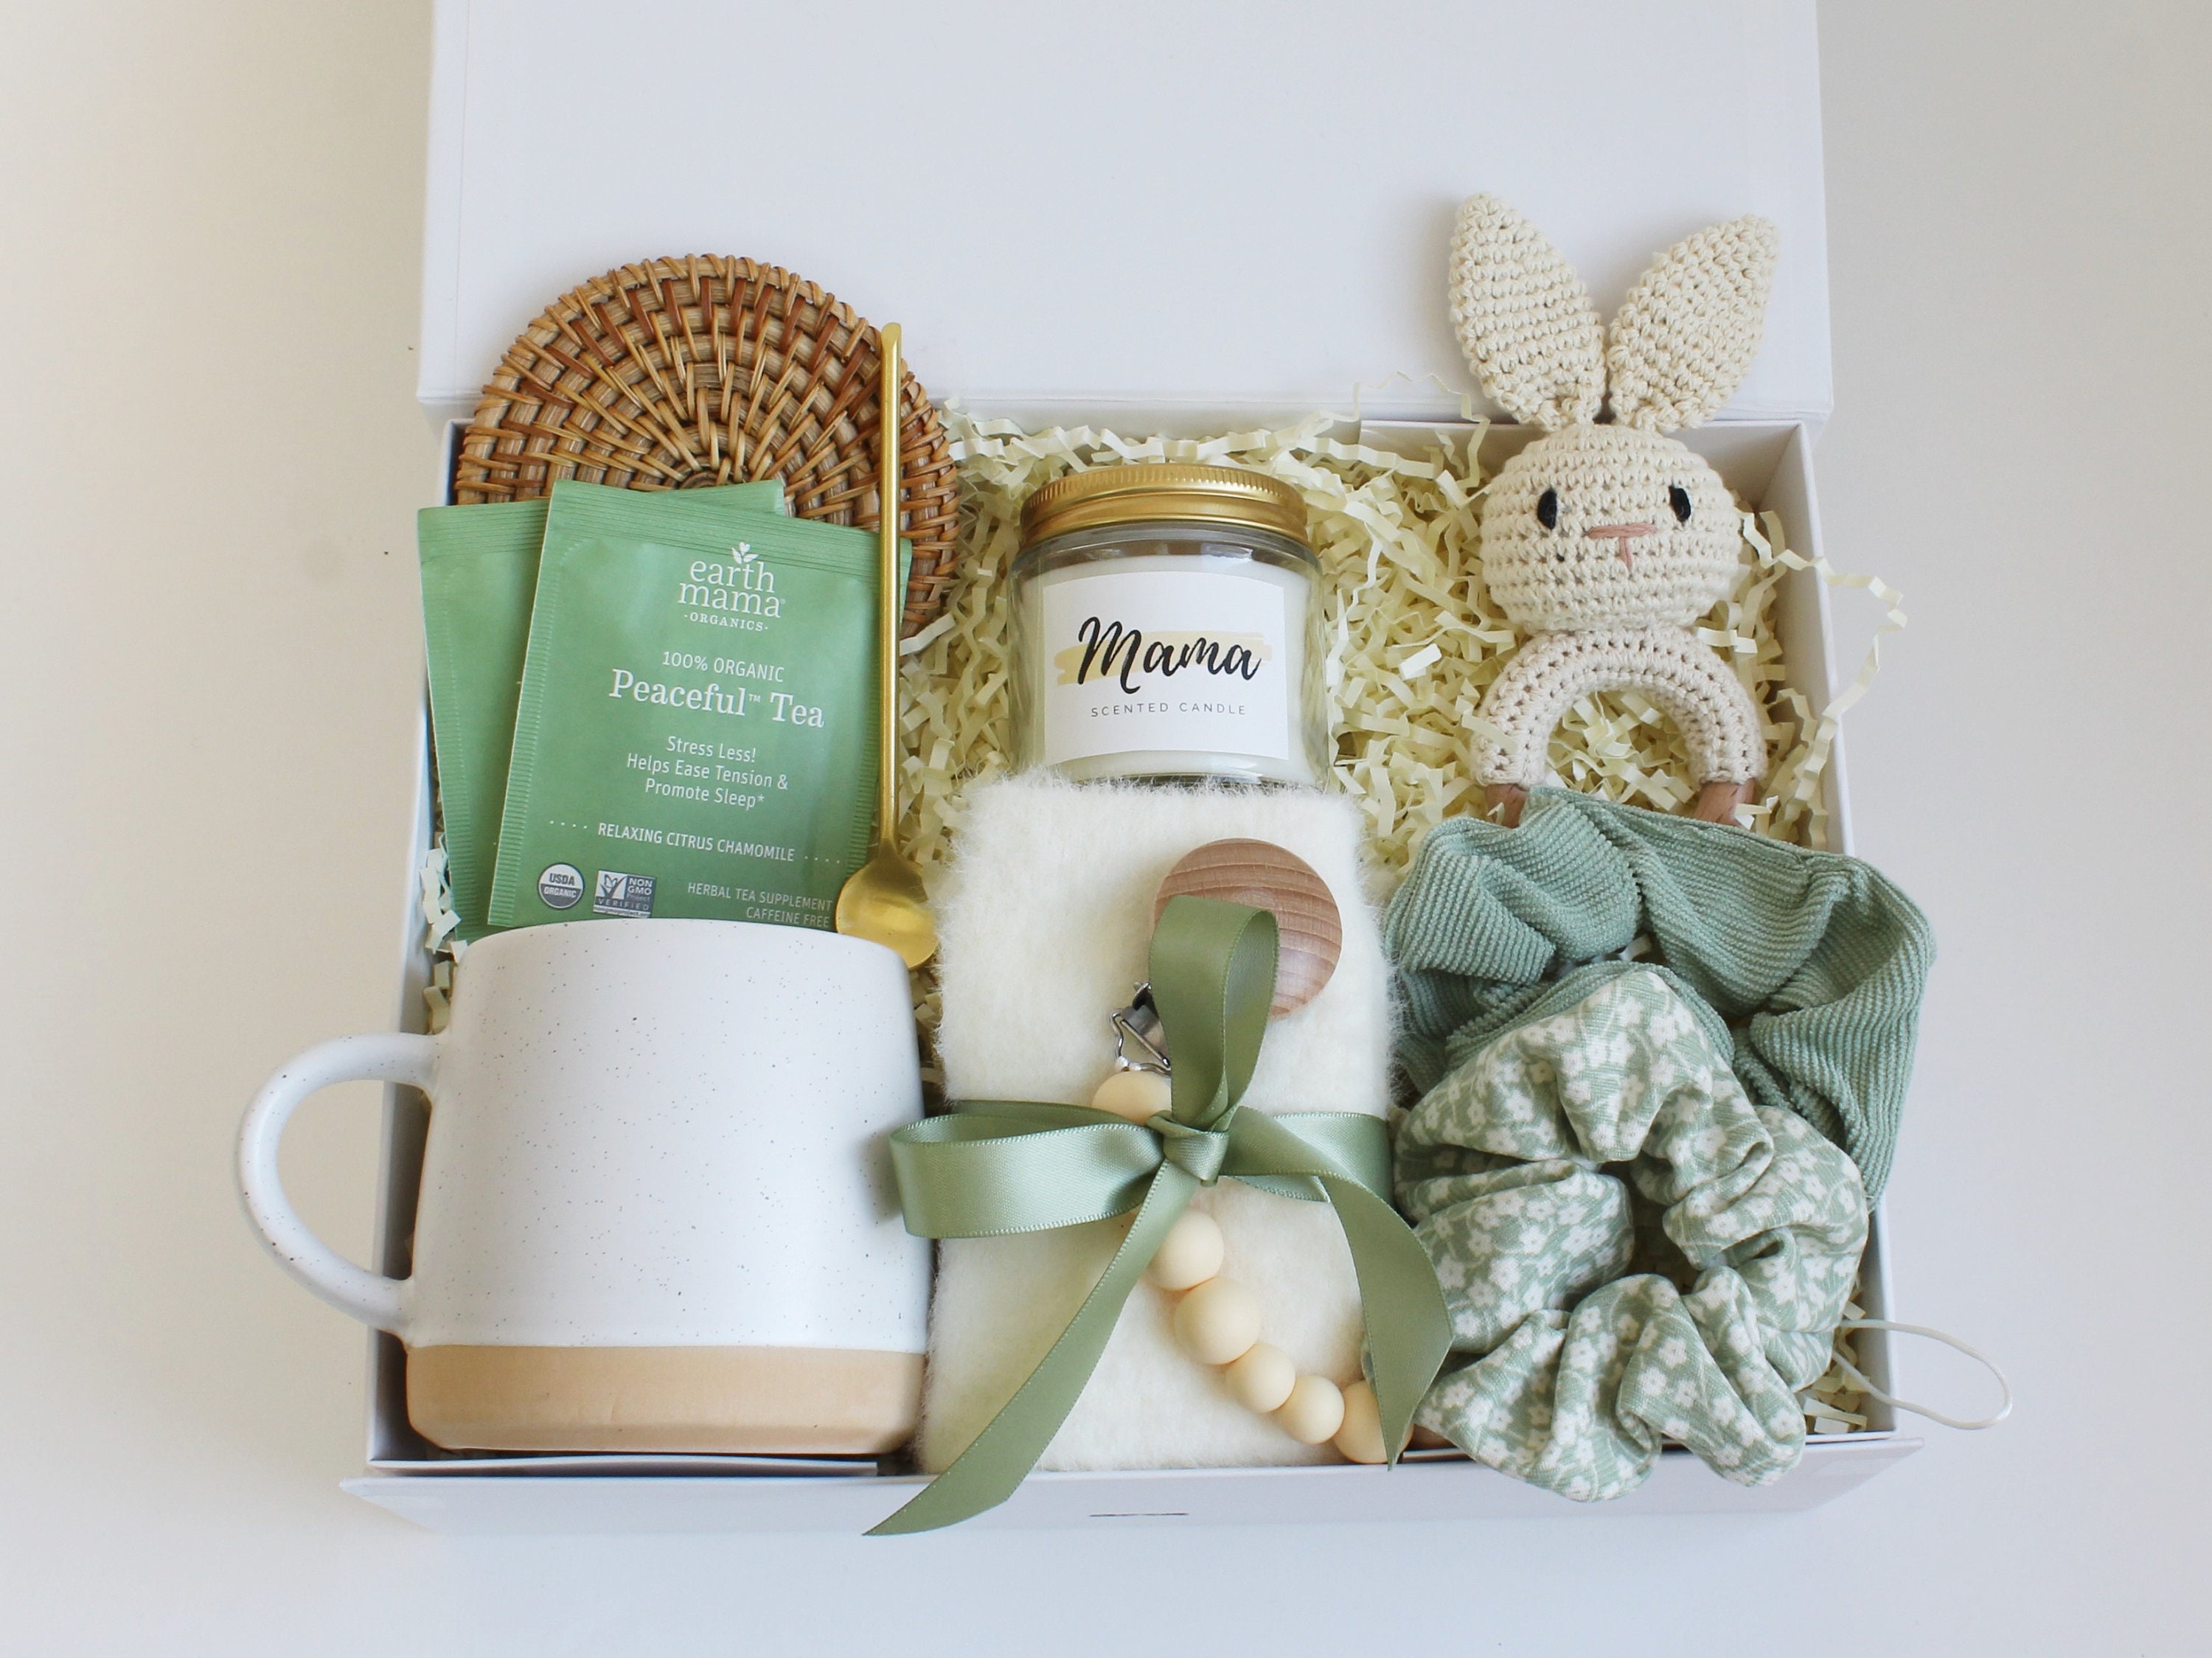  New Mom Gift Box, New Mom Gifts for Women After Birth, Push  Gifts for New Mommy Care Package, for New Mom Gifts for Women, Pregnancy  Gifts for First Time Moms, Gifts